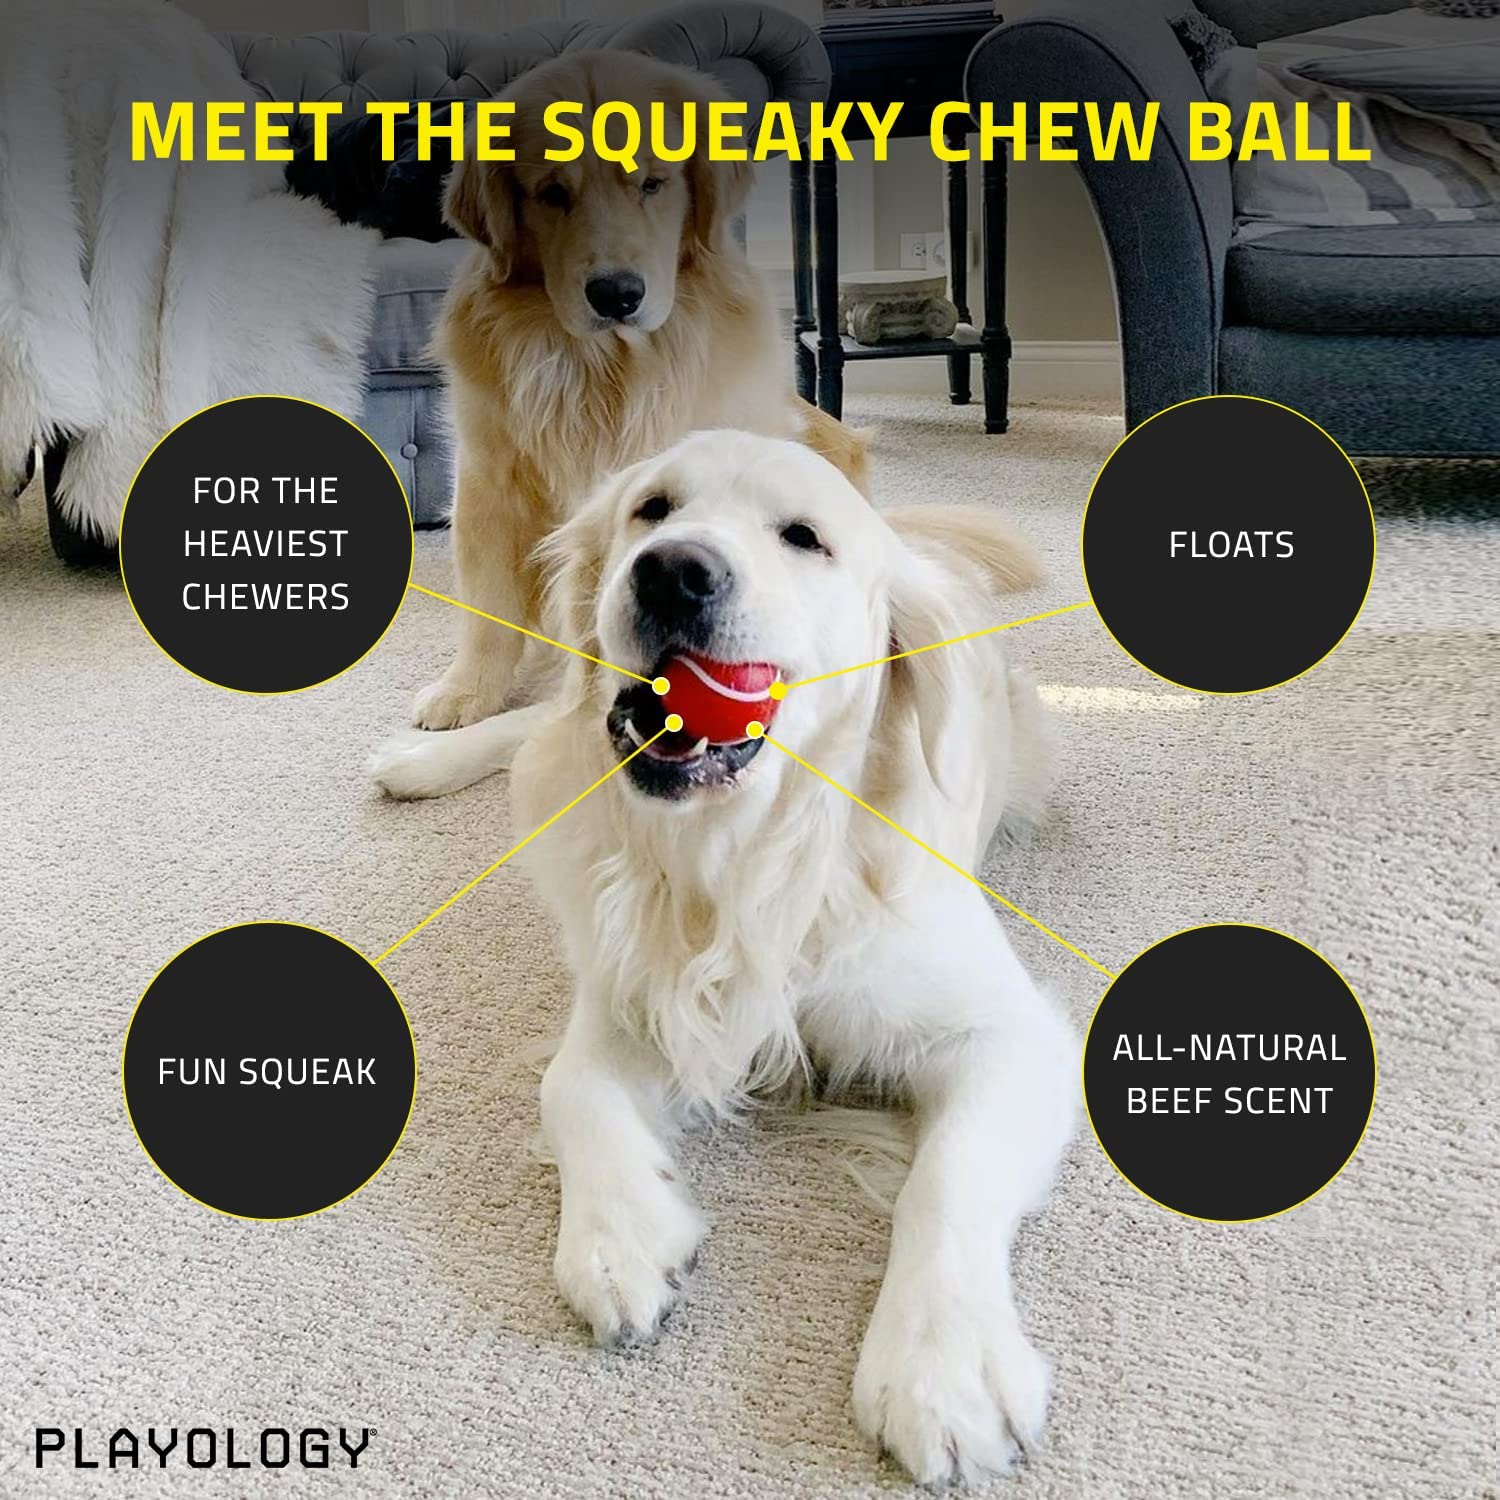 Playology Squeaky Chew Ball Dog Toy, for Extra Large Dogs (50lbs and Up) - for Heaviest Chewers - Engaging All-Natural Scented Toy - Non-Toxic Materials